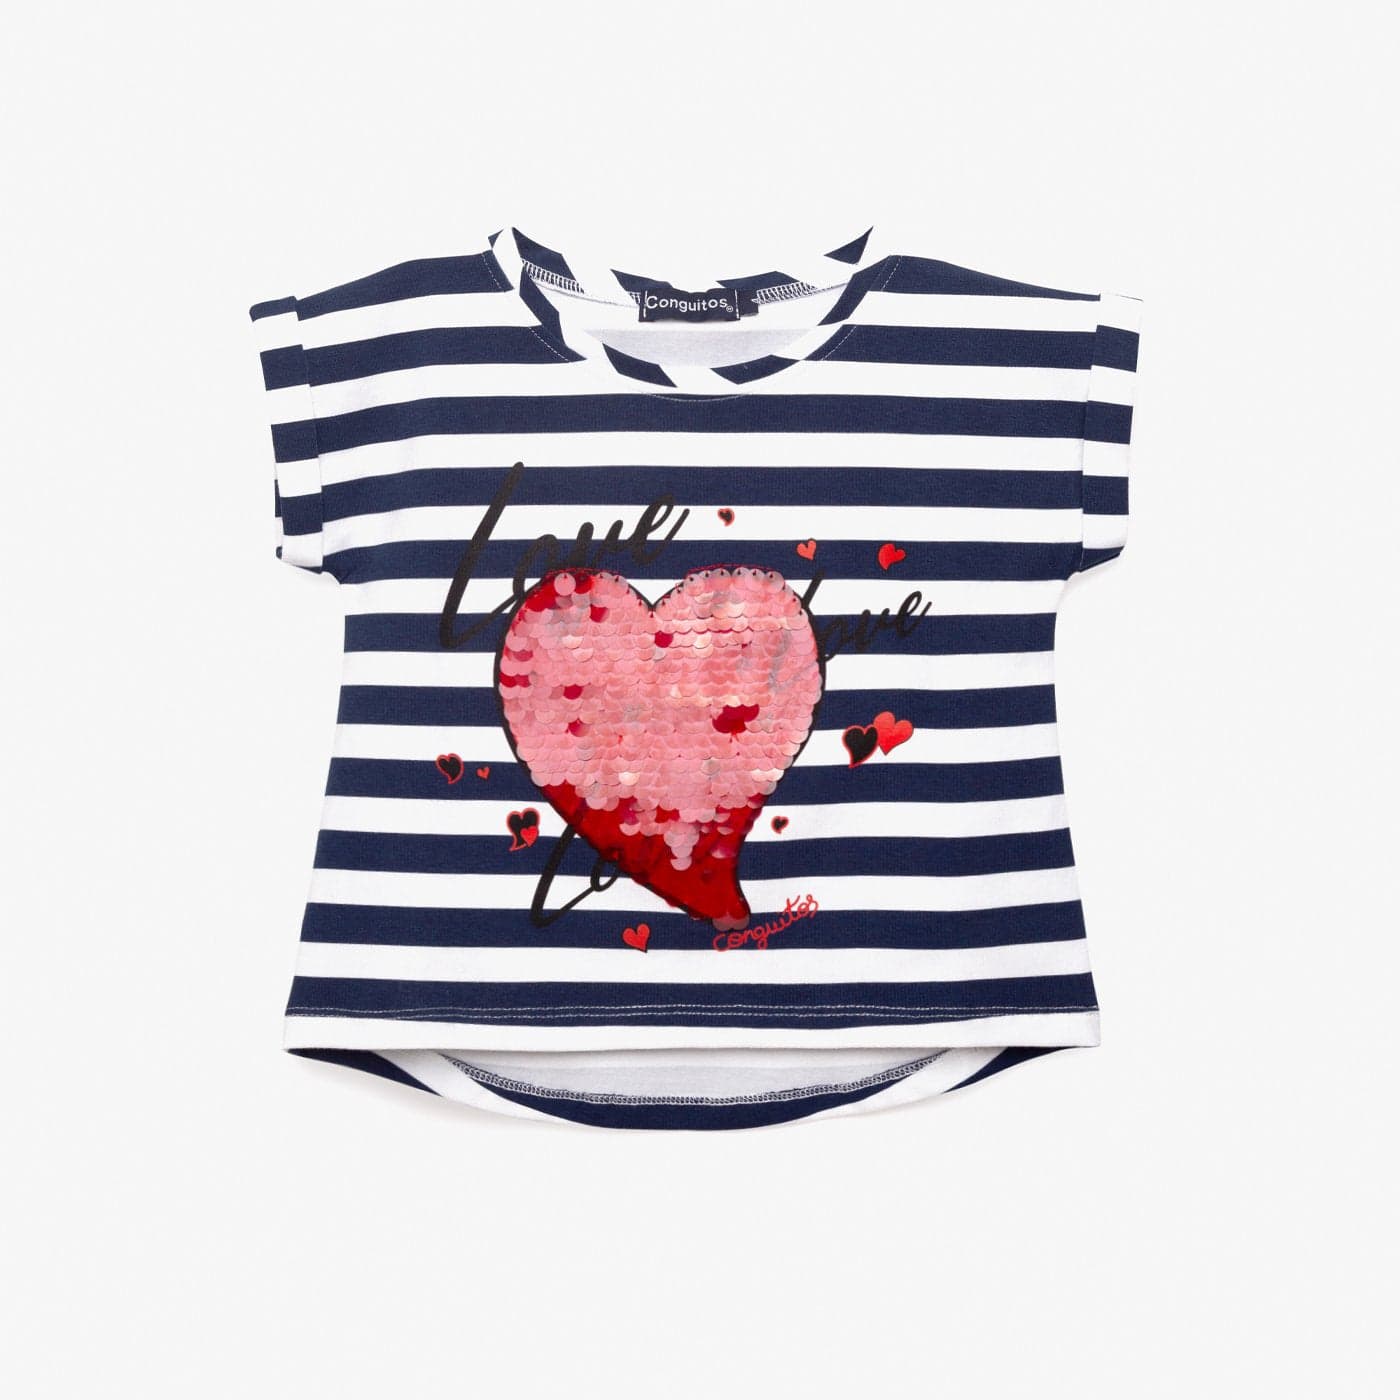 CONGUITOS TEXTIL Clothing Girl's Navy Love T-Shirt